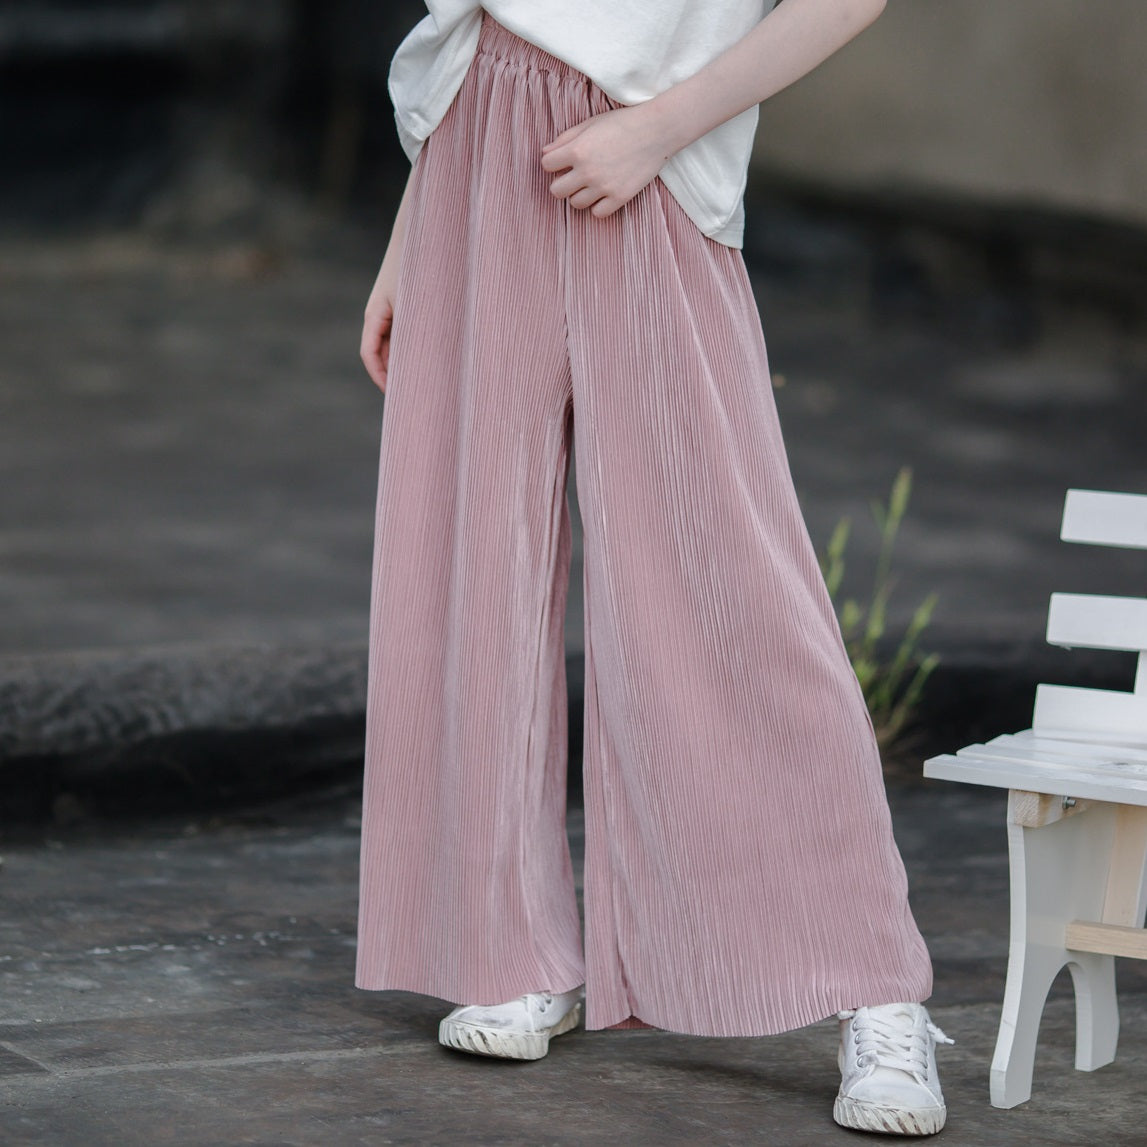 Made by Olivia Palazzo Pants Are Perfect for AtHome Lounging